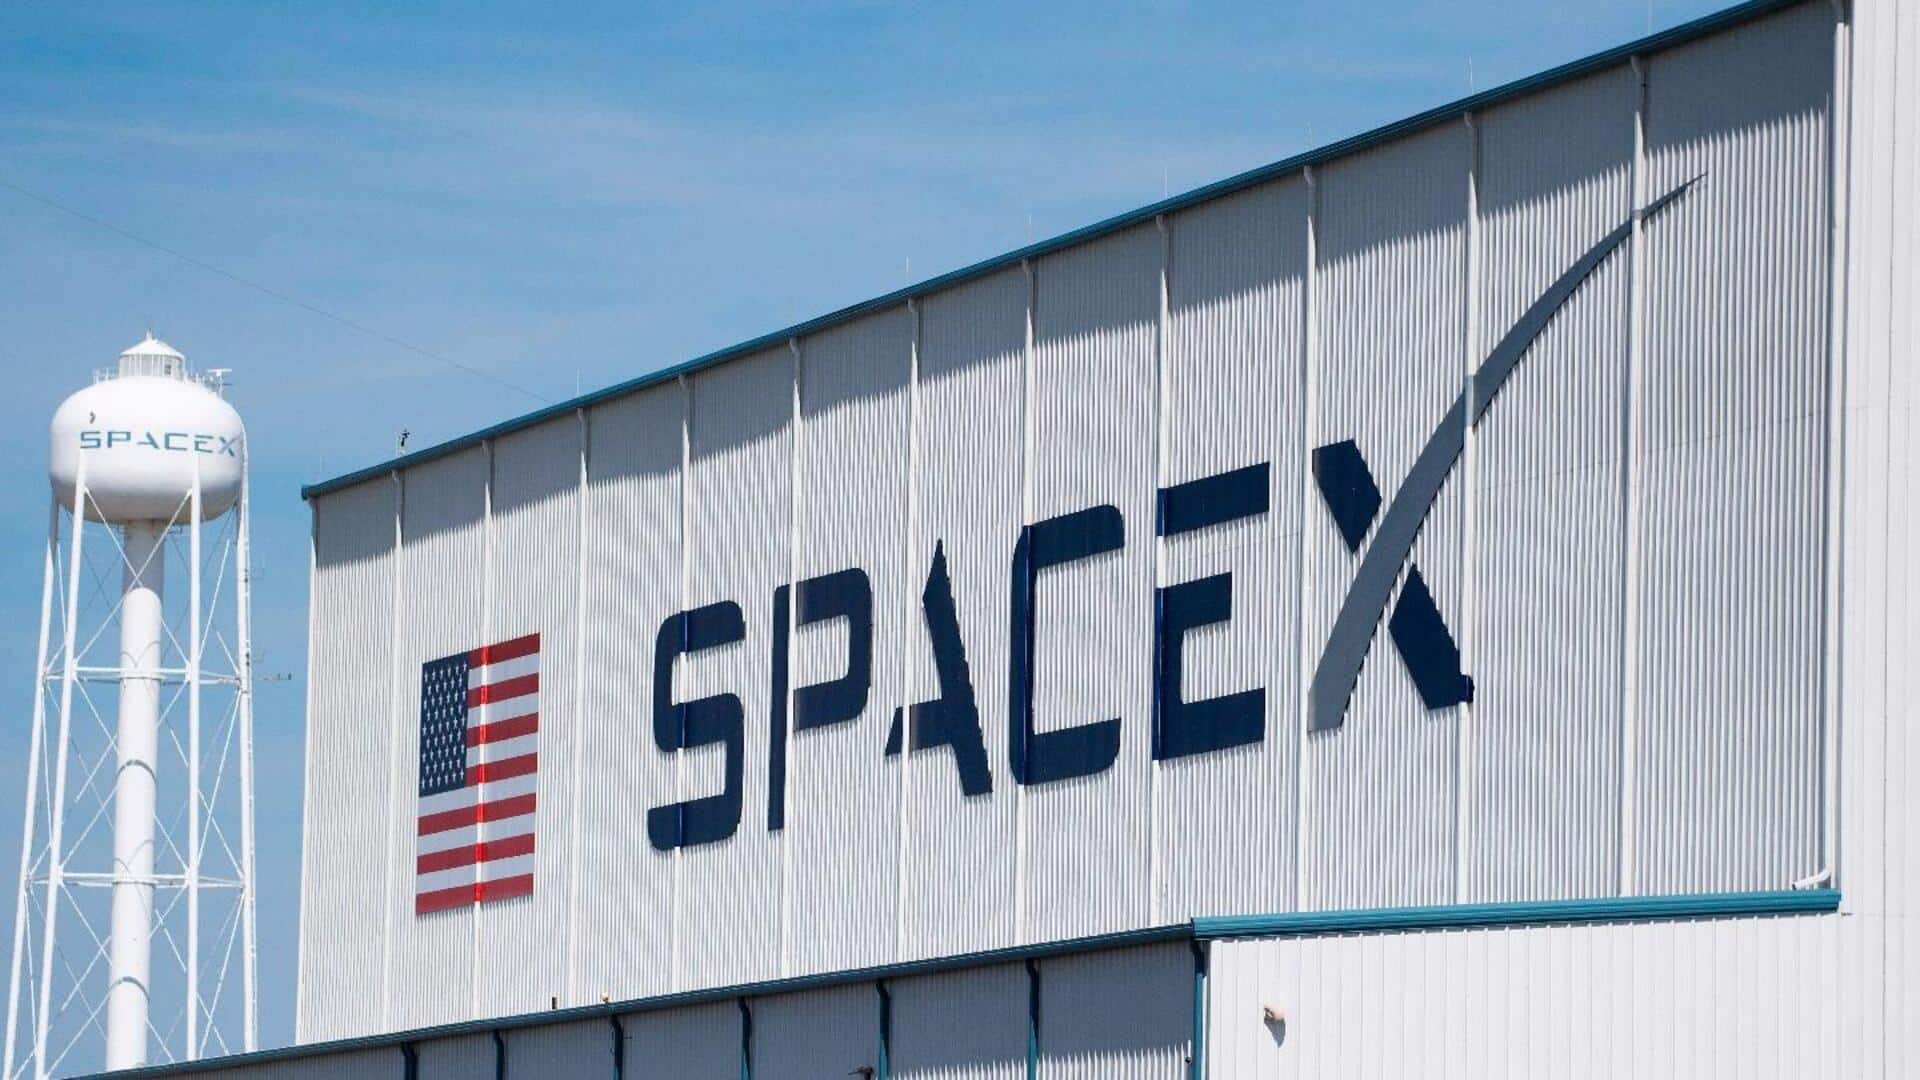 SpaceX sued by employee for allegedly promoting serial sexual abuse